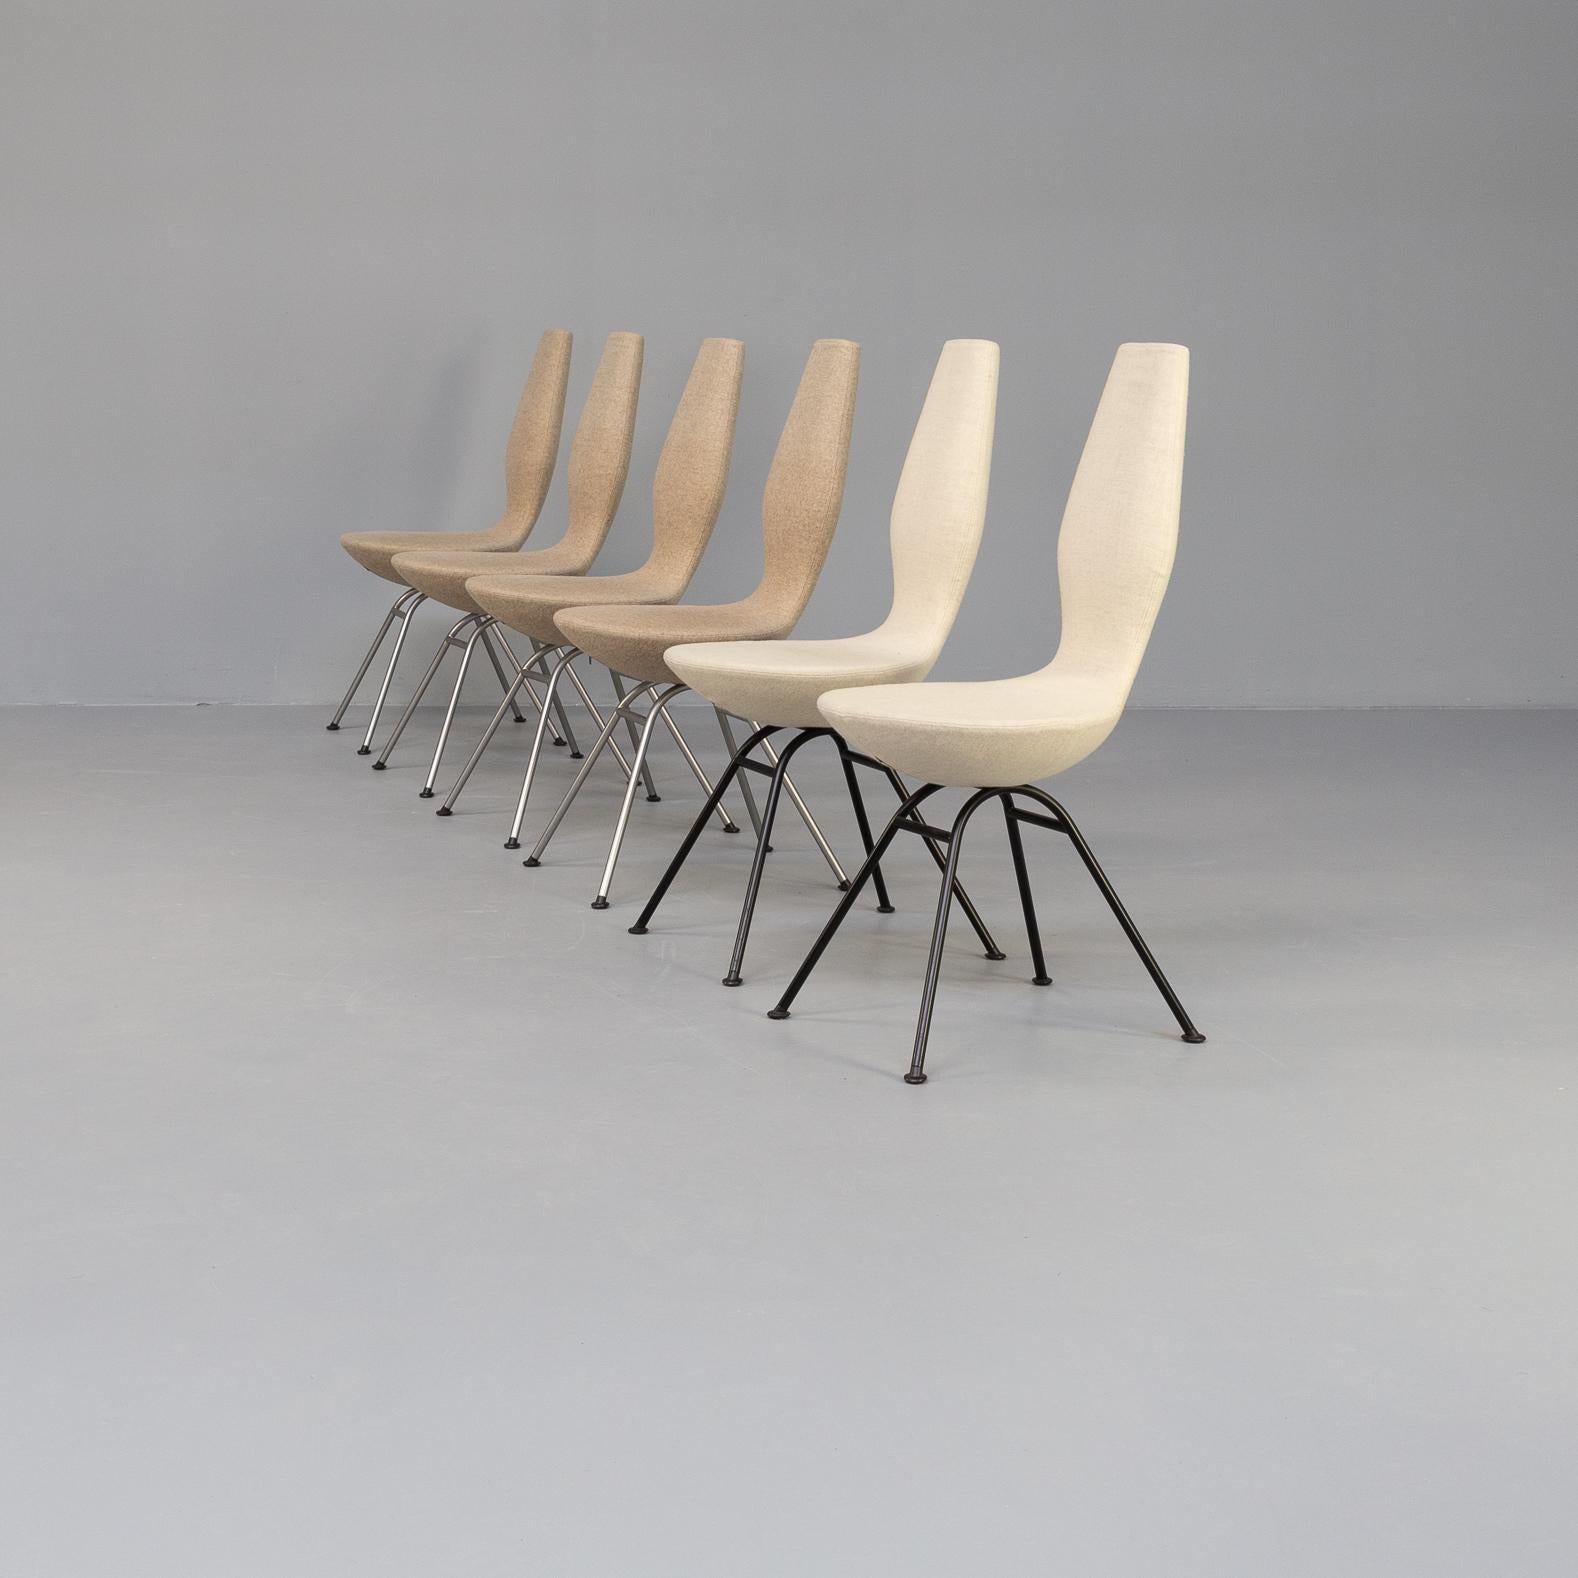 Date is a full matching with Stokke chair, ‘active’ chair. Active means that the chairs move a little back and forward. Forward for working postions and backwards for relax positions. Not only is it a statement piece, but it is also crafted to